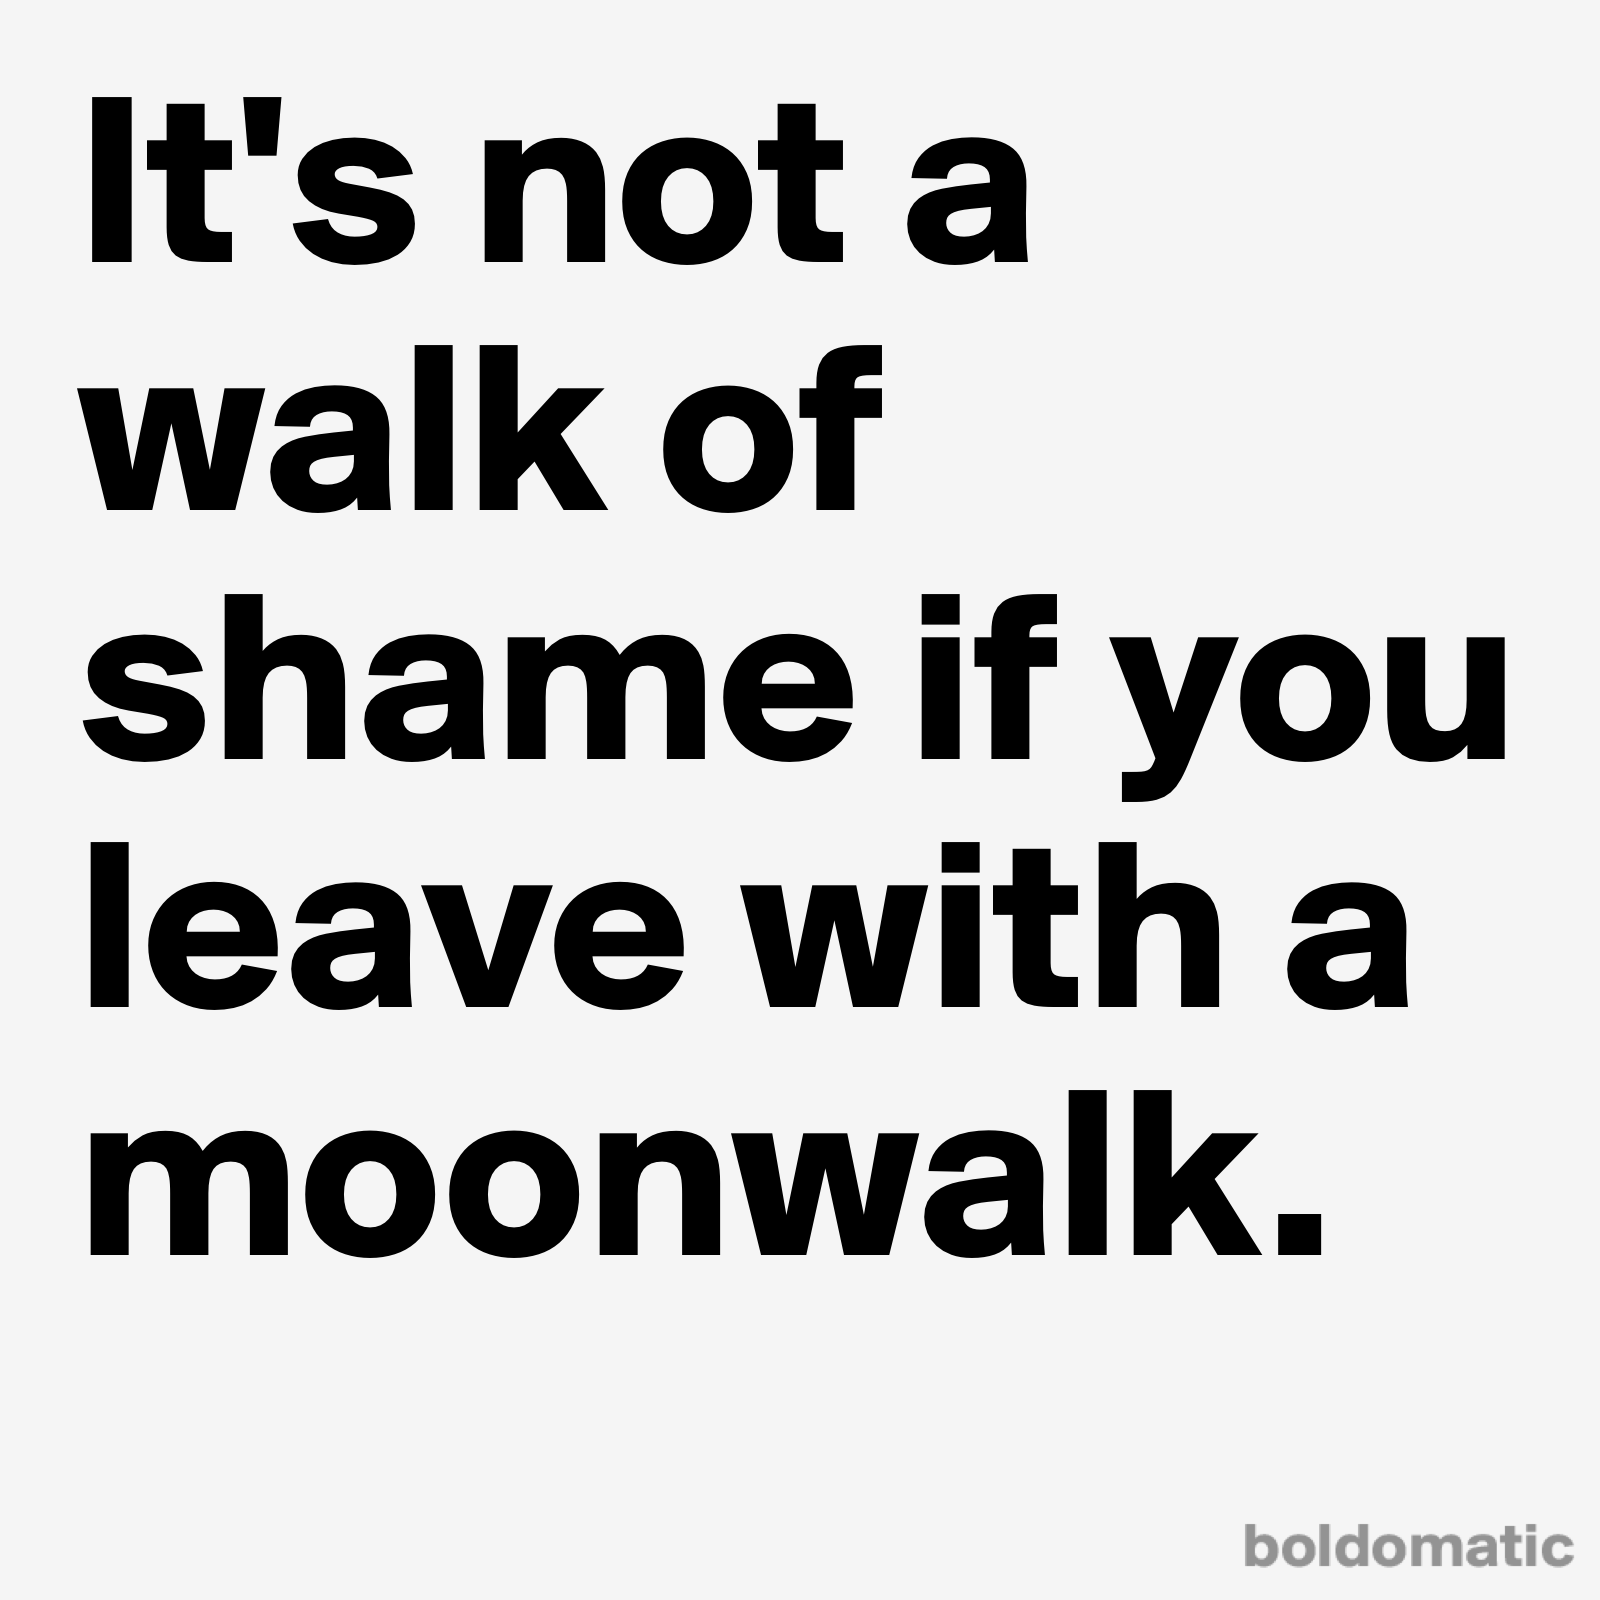 Boldomatic On Twitter It S Not A Walk Of Shame If You Leave With A Moonwalk Boldomatic Http T Co Fgqoqkuyfv Featured in techcrunch as the instagram for text, boldomatic is the #1 network for quotes and sayings. twitter